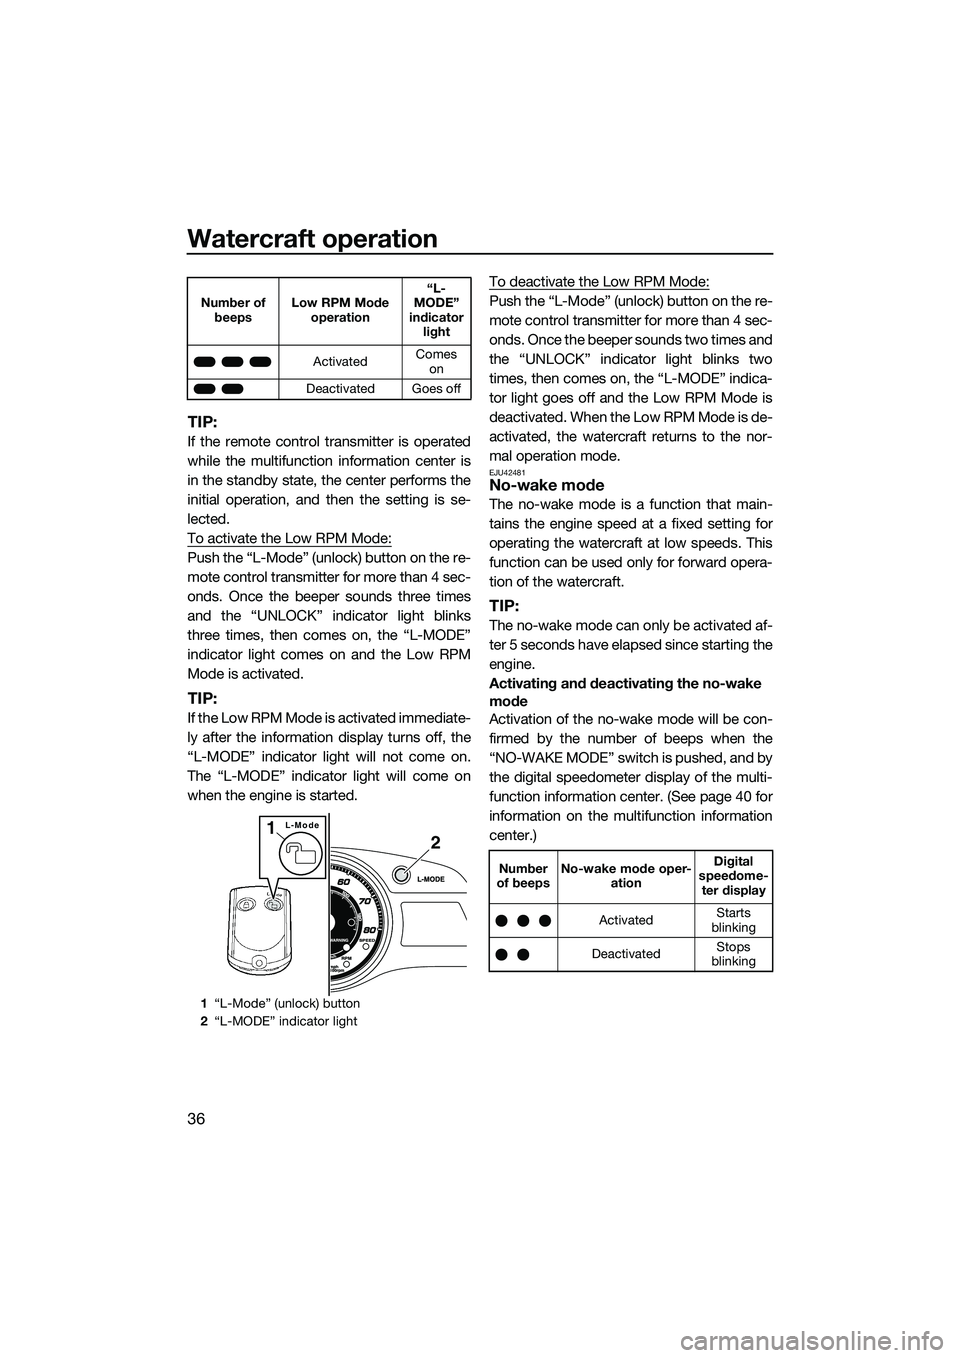 YAMAHA FX SVHO 2014  Owners Manual Watercraft operation
36
TIP:
If the remote control transmitter is operated
while the multifunction information center is
in the standby state, the center performs the
initial operation, and then the s